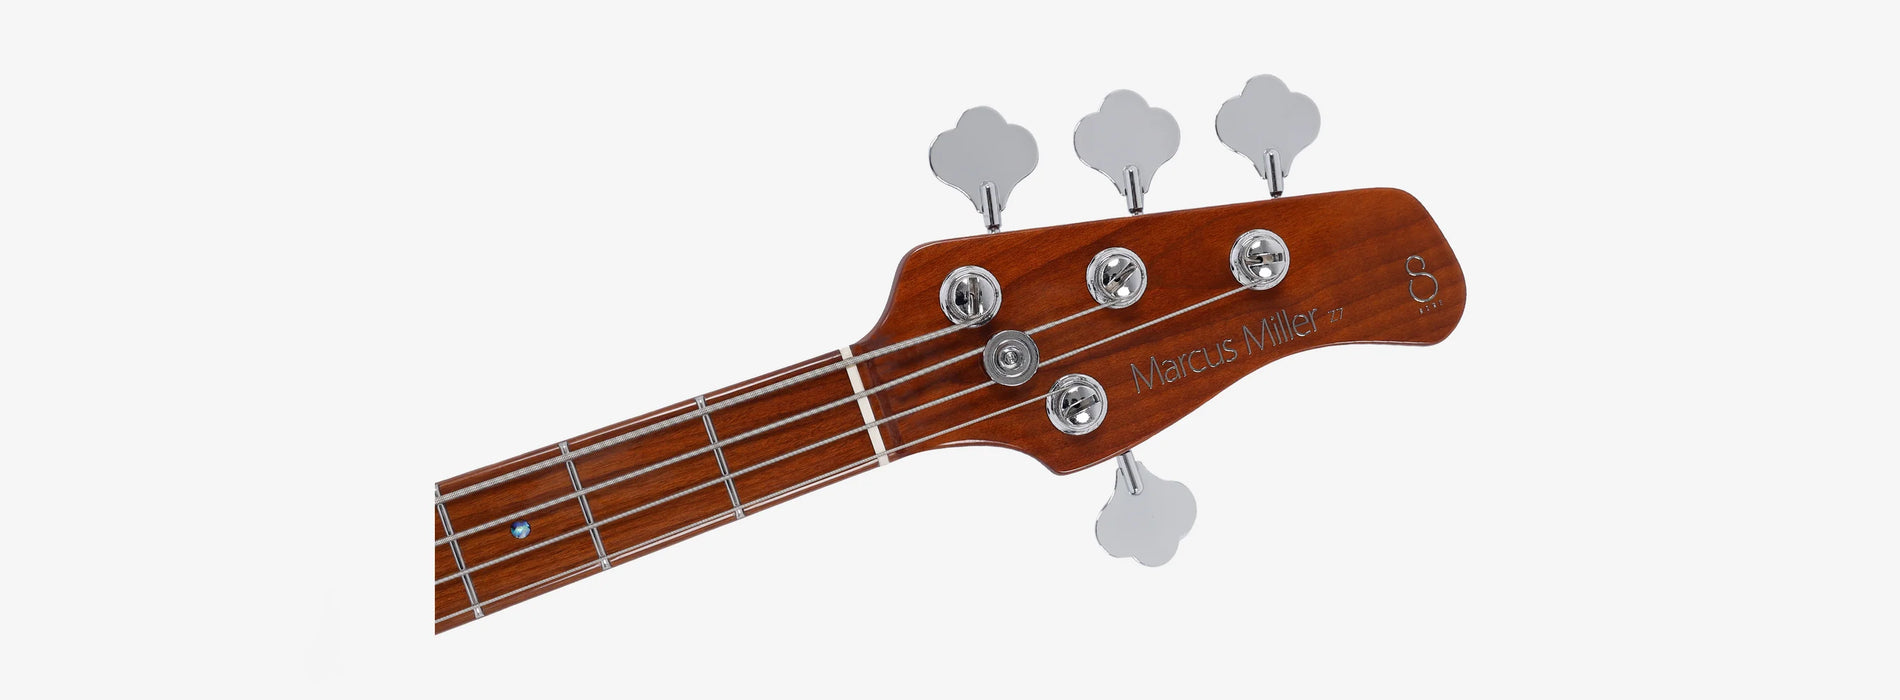 Sire Bass Z7 4 String - Natural